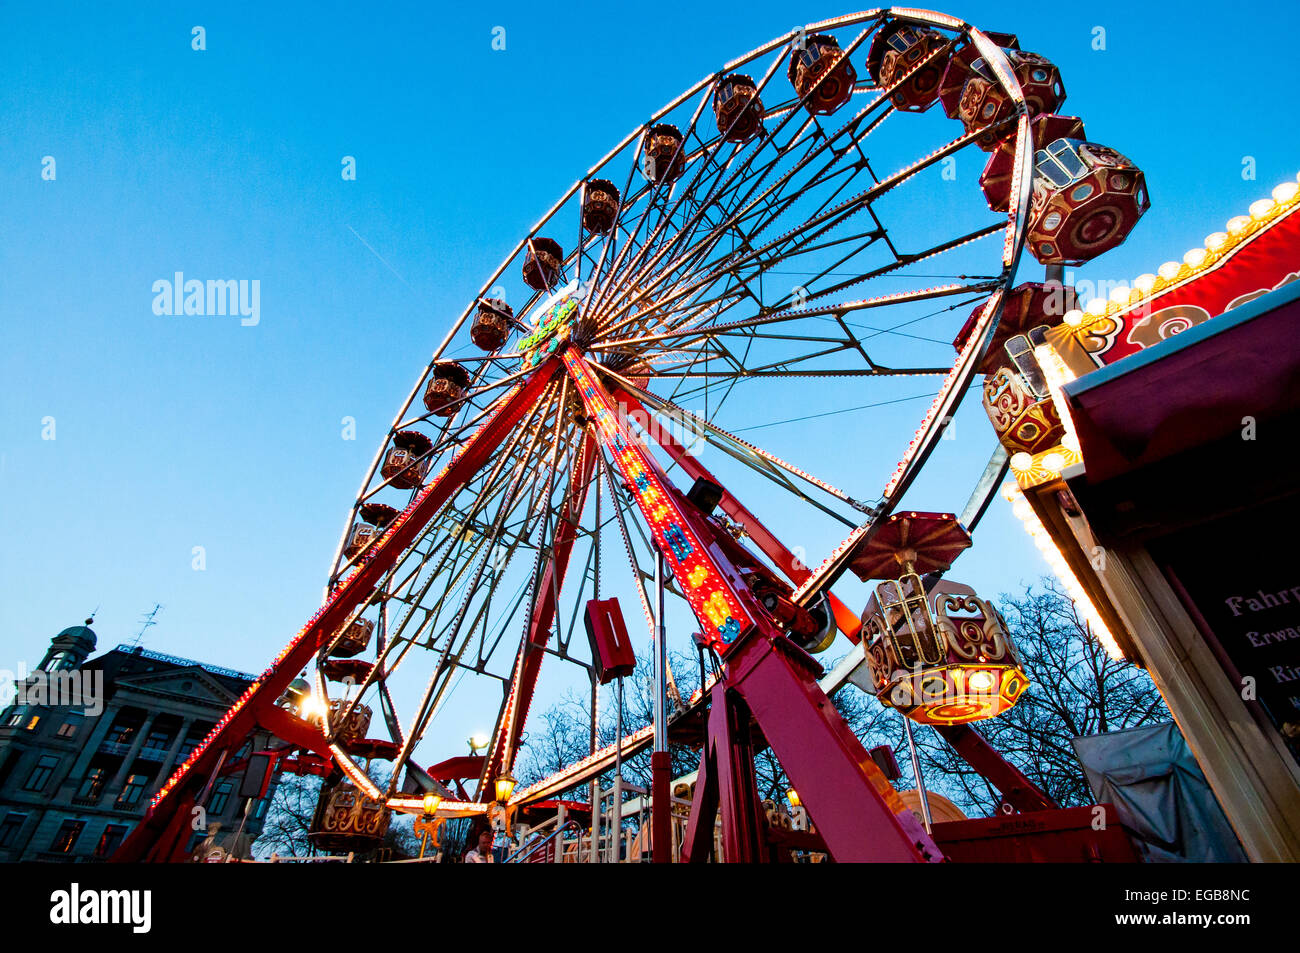 Ferris wheel in Zurich, Switzerland taken at sunset. Annual carnival perched at the mouth of the Limmat Rive and Lake Zurich. Stock Photo